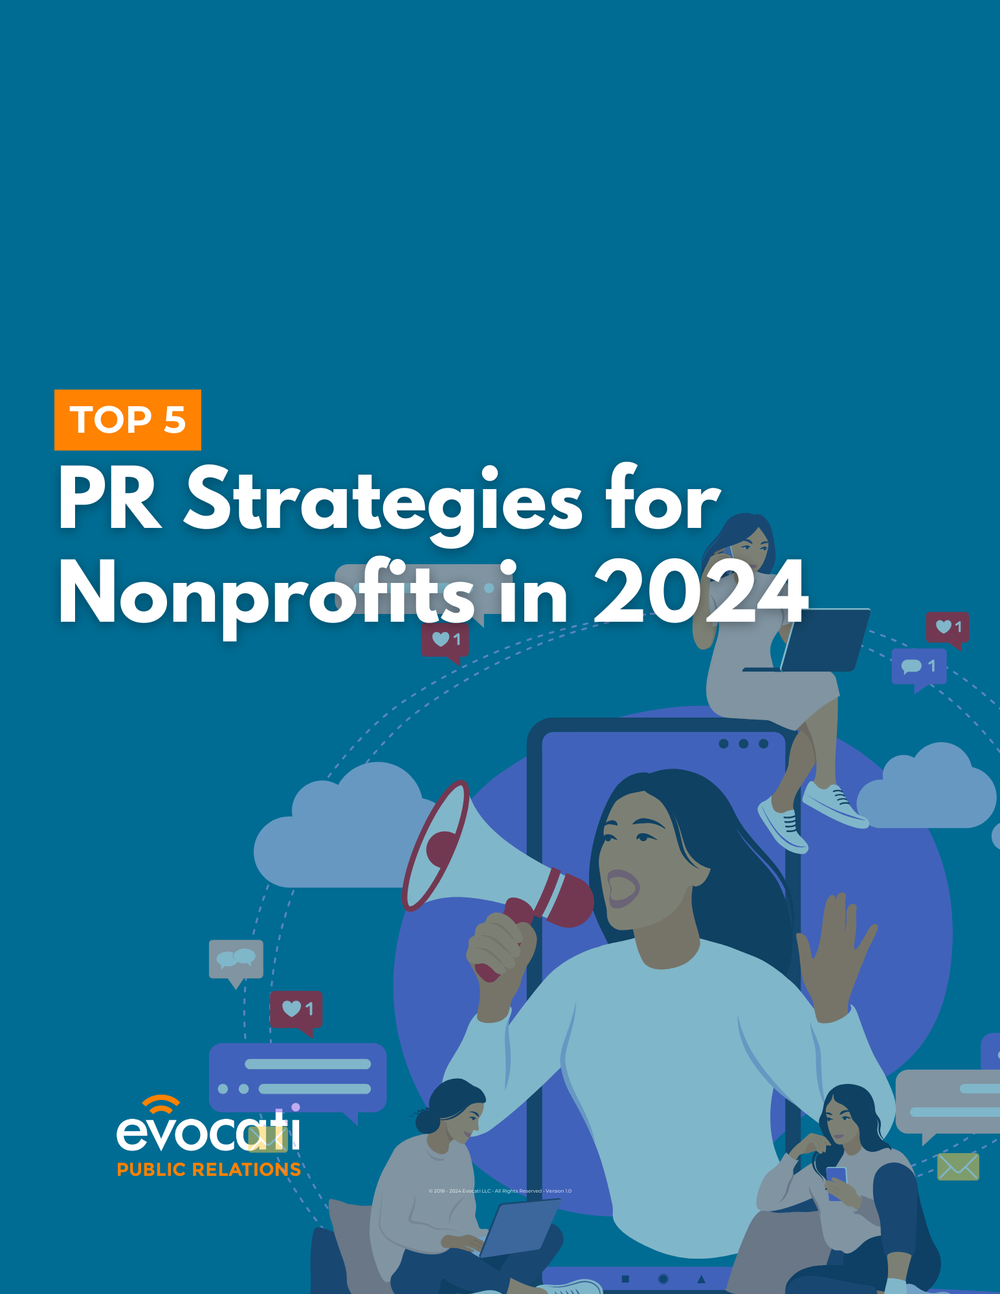 Guide: Top 5 PR Strategies for Nonprofits in 2024